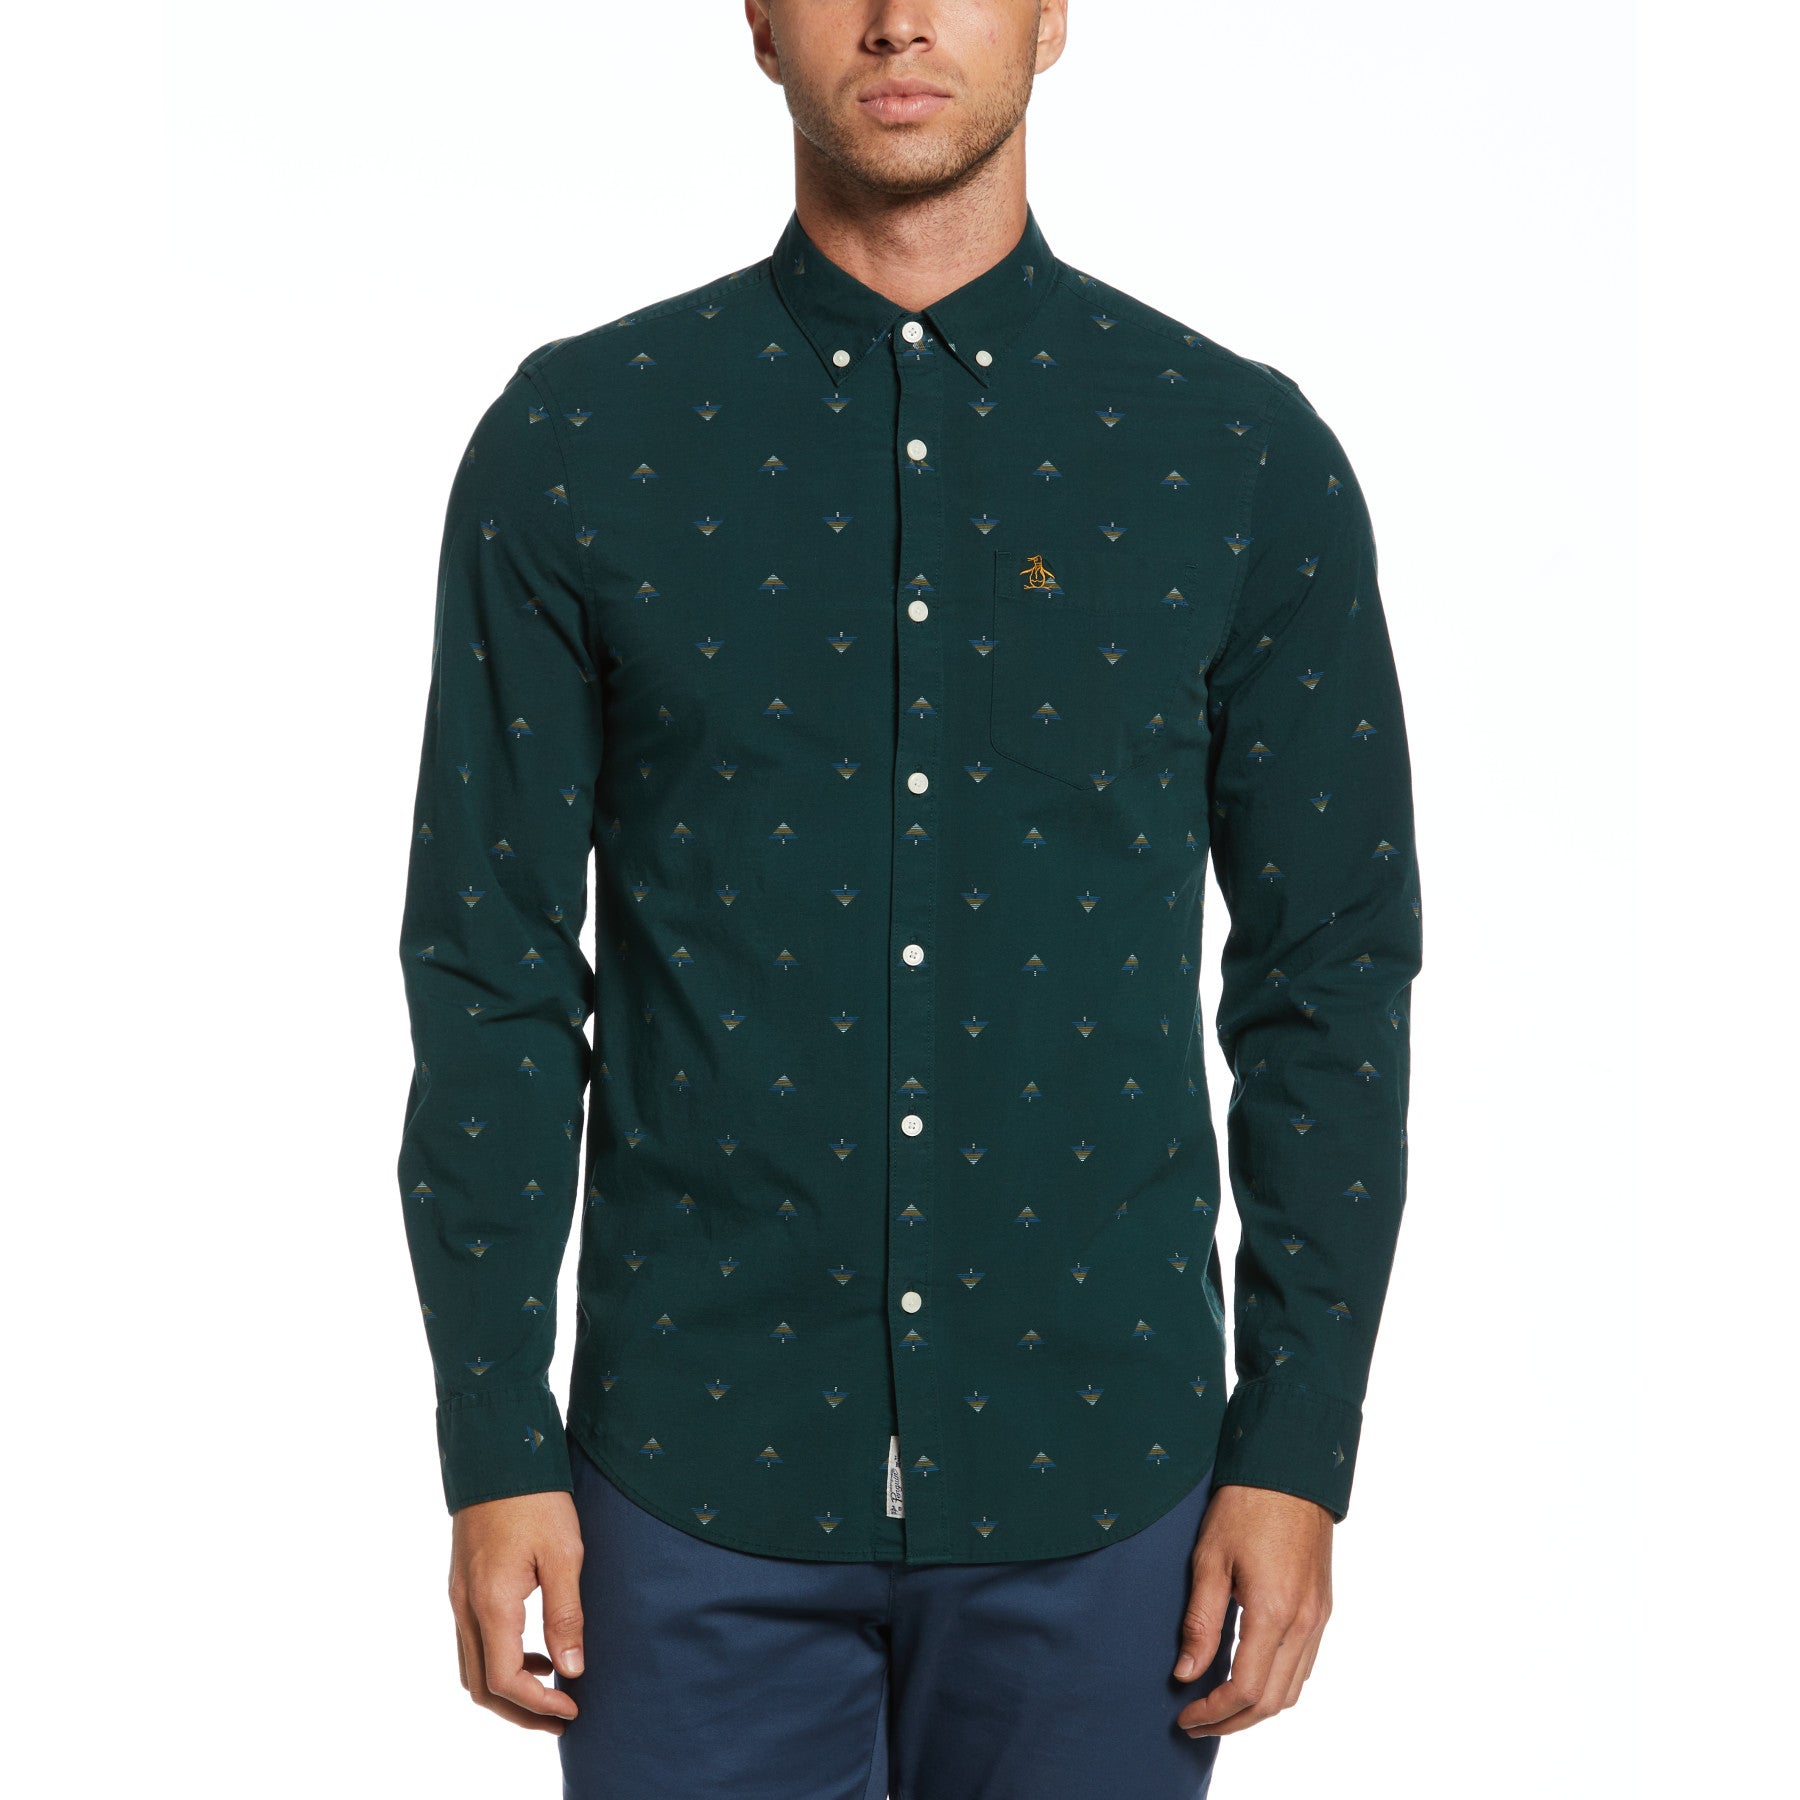 View All Over Print Festive Shirt In Ponderosa Pine information